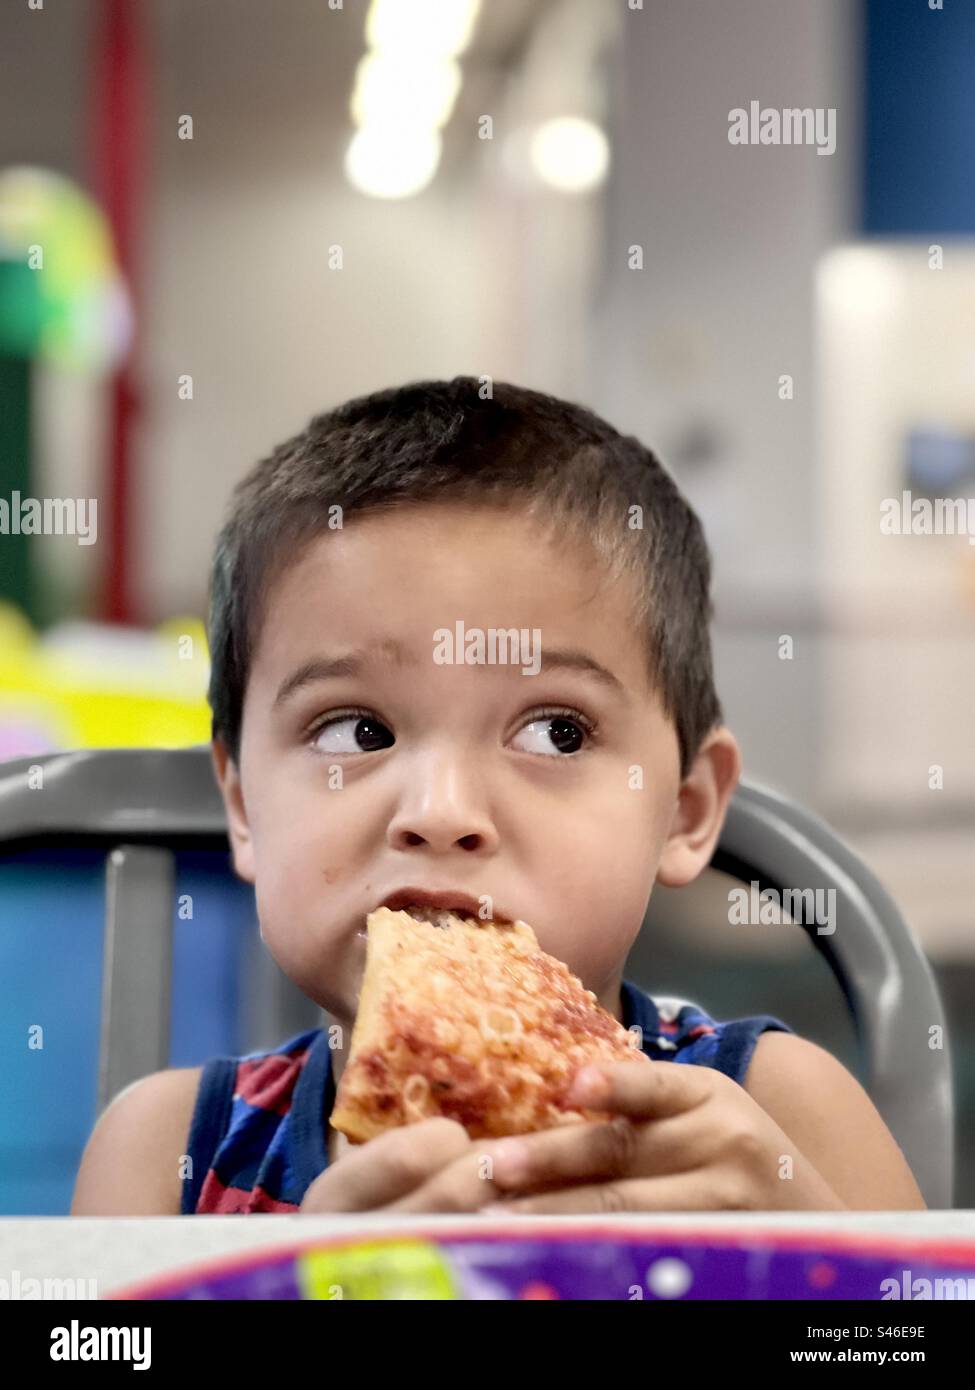 A cute little dark haired boy eating pizza in a restaurant Stock Photo